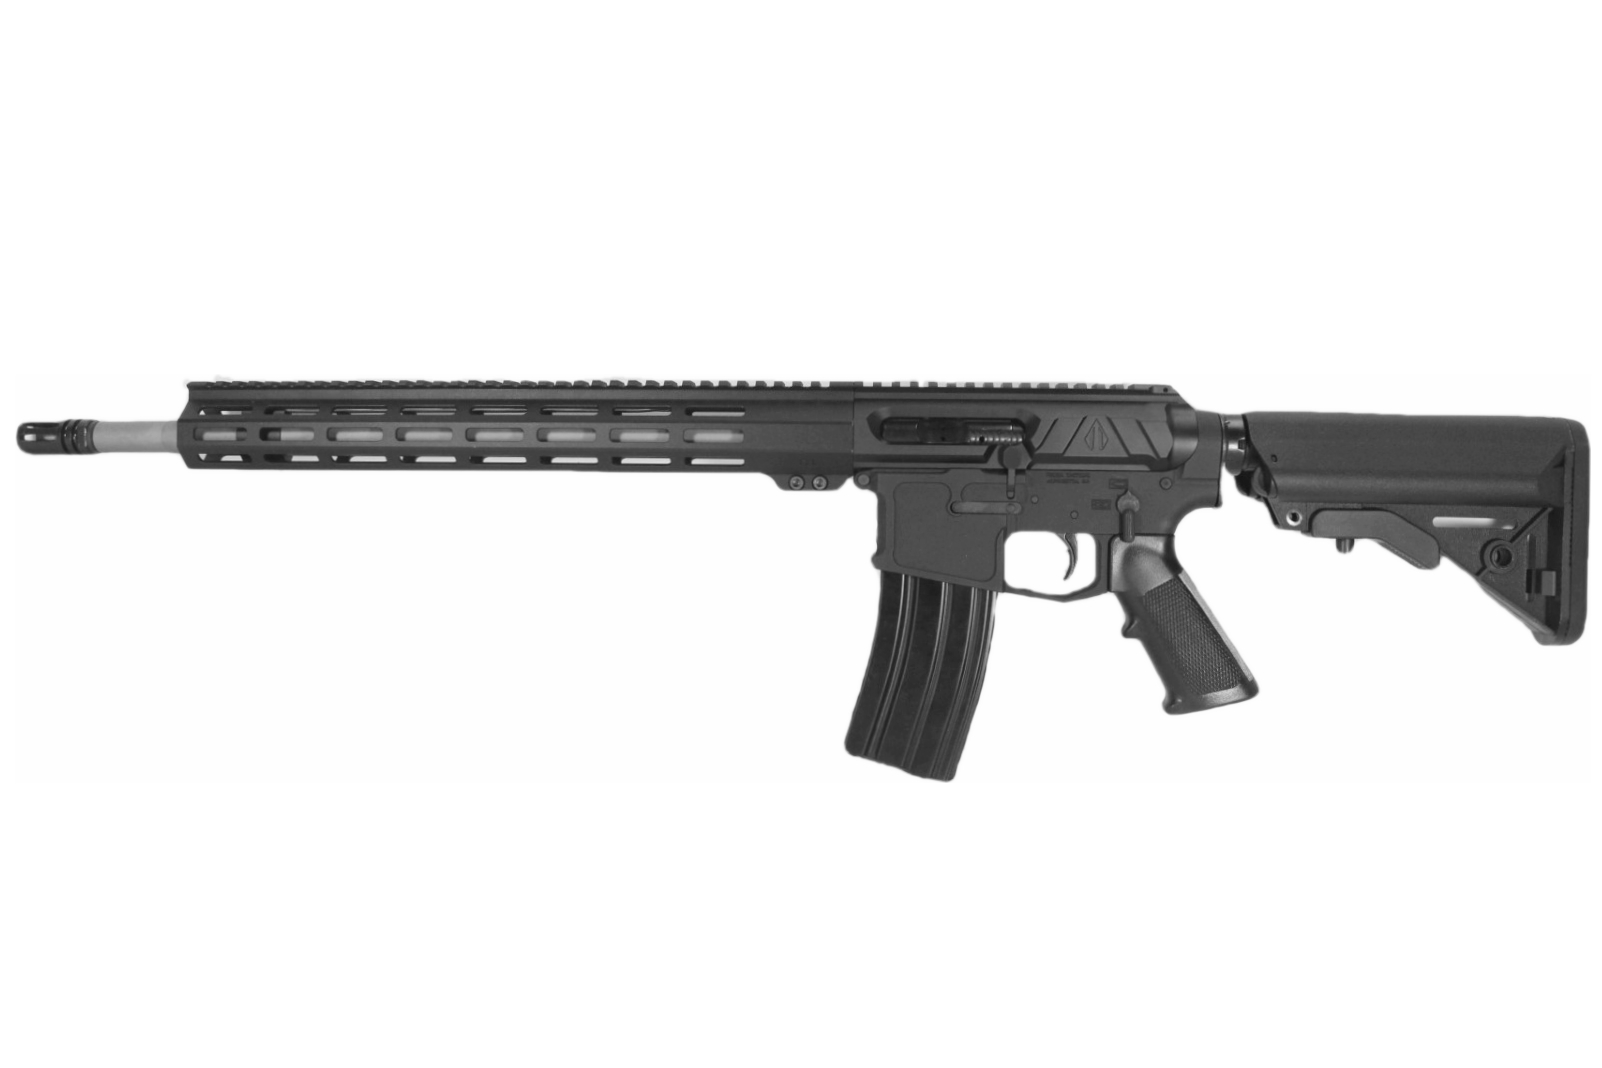 Pro2A Tactical's Valiant Left Handed 18 inch AR-15 223 Wylde Stainless Premium M-LOK Complete Side Charging Rifle